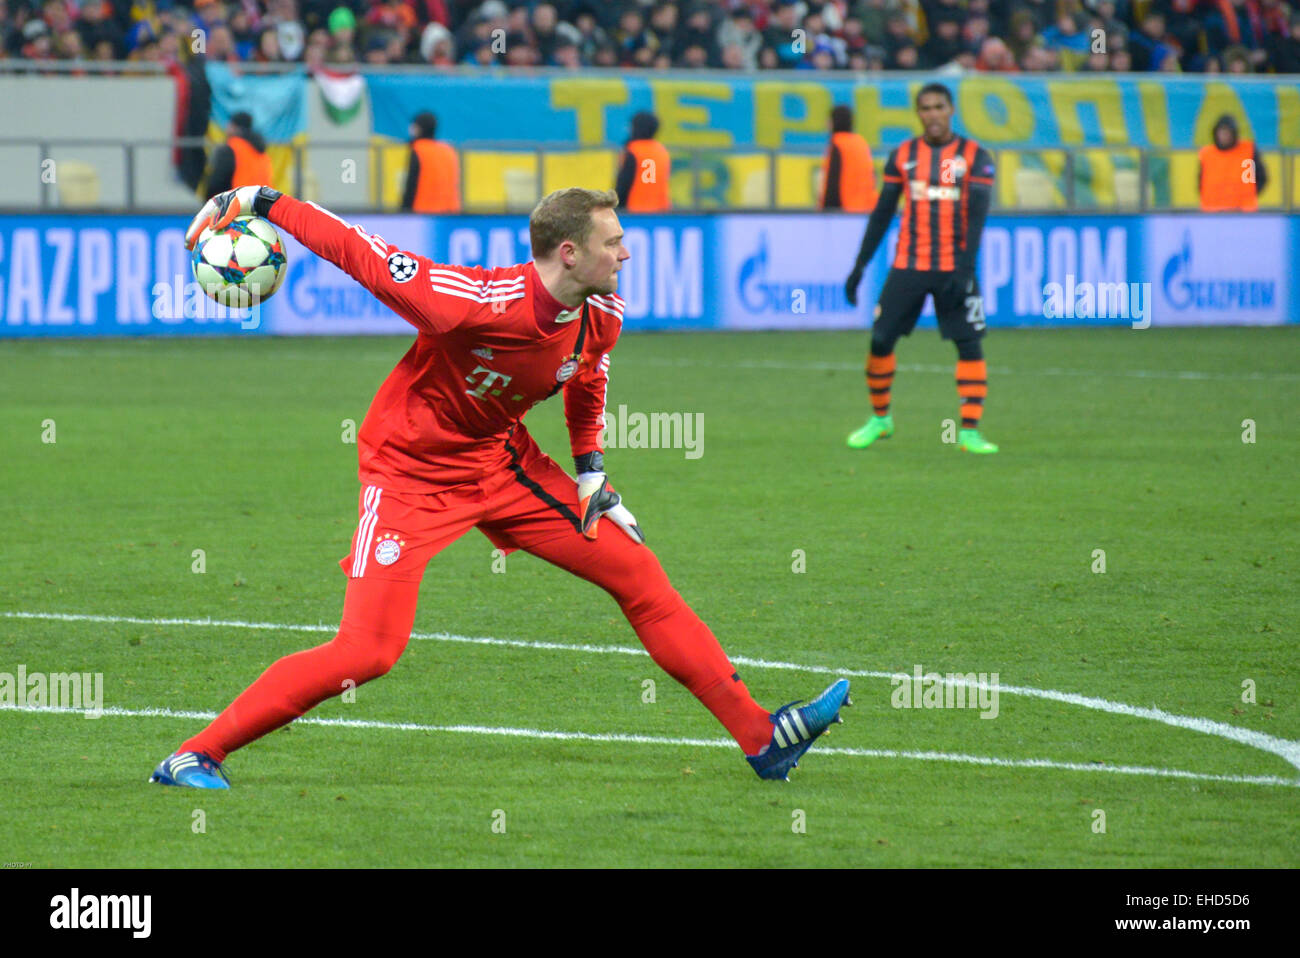 Manuel Neuer during the match between FC Shakhtar Donetsk vs FC Bayern München. UEFA Champions League. Stock Photo